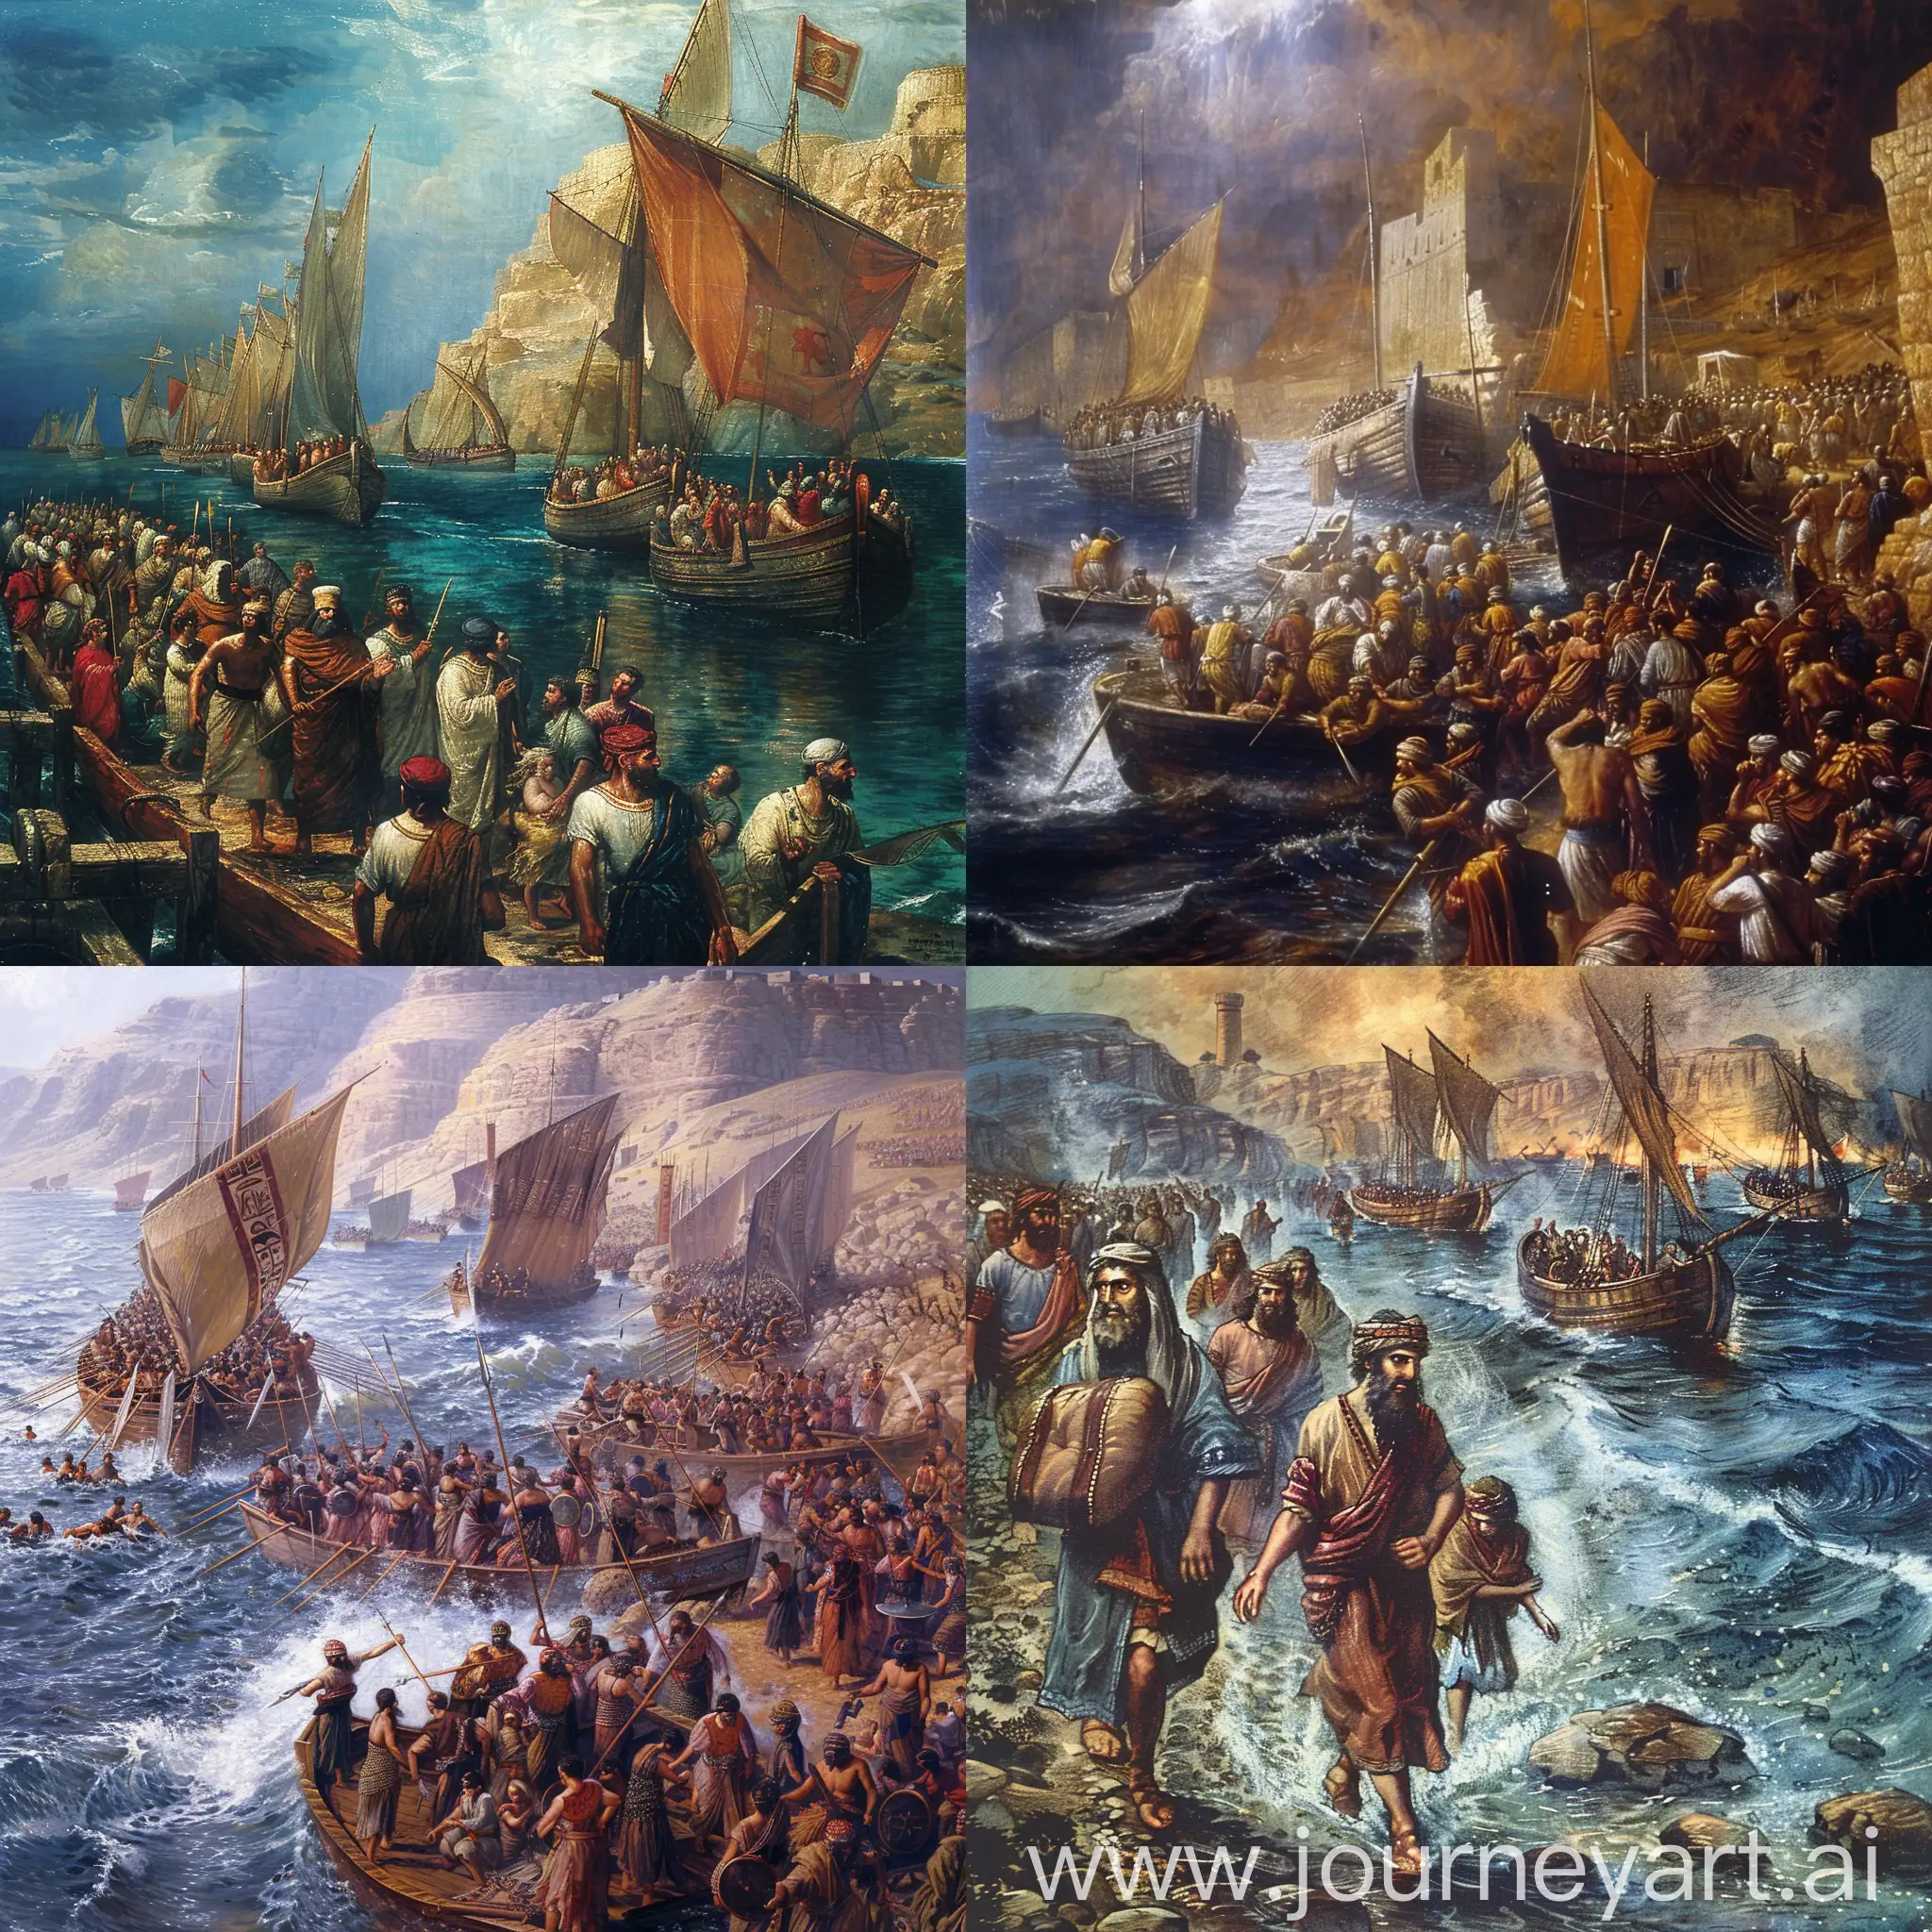 The Exodus, the Israelites, men, women, and children, leaving egypt by way of ships